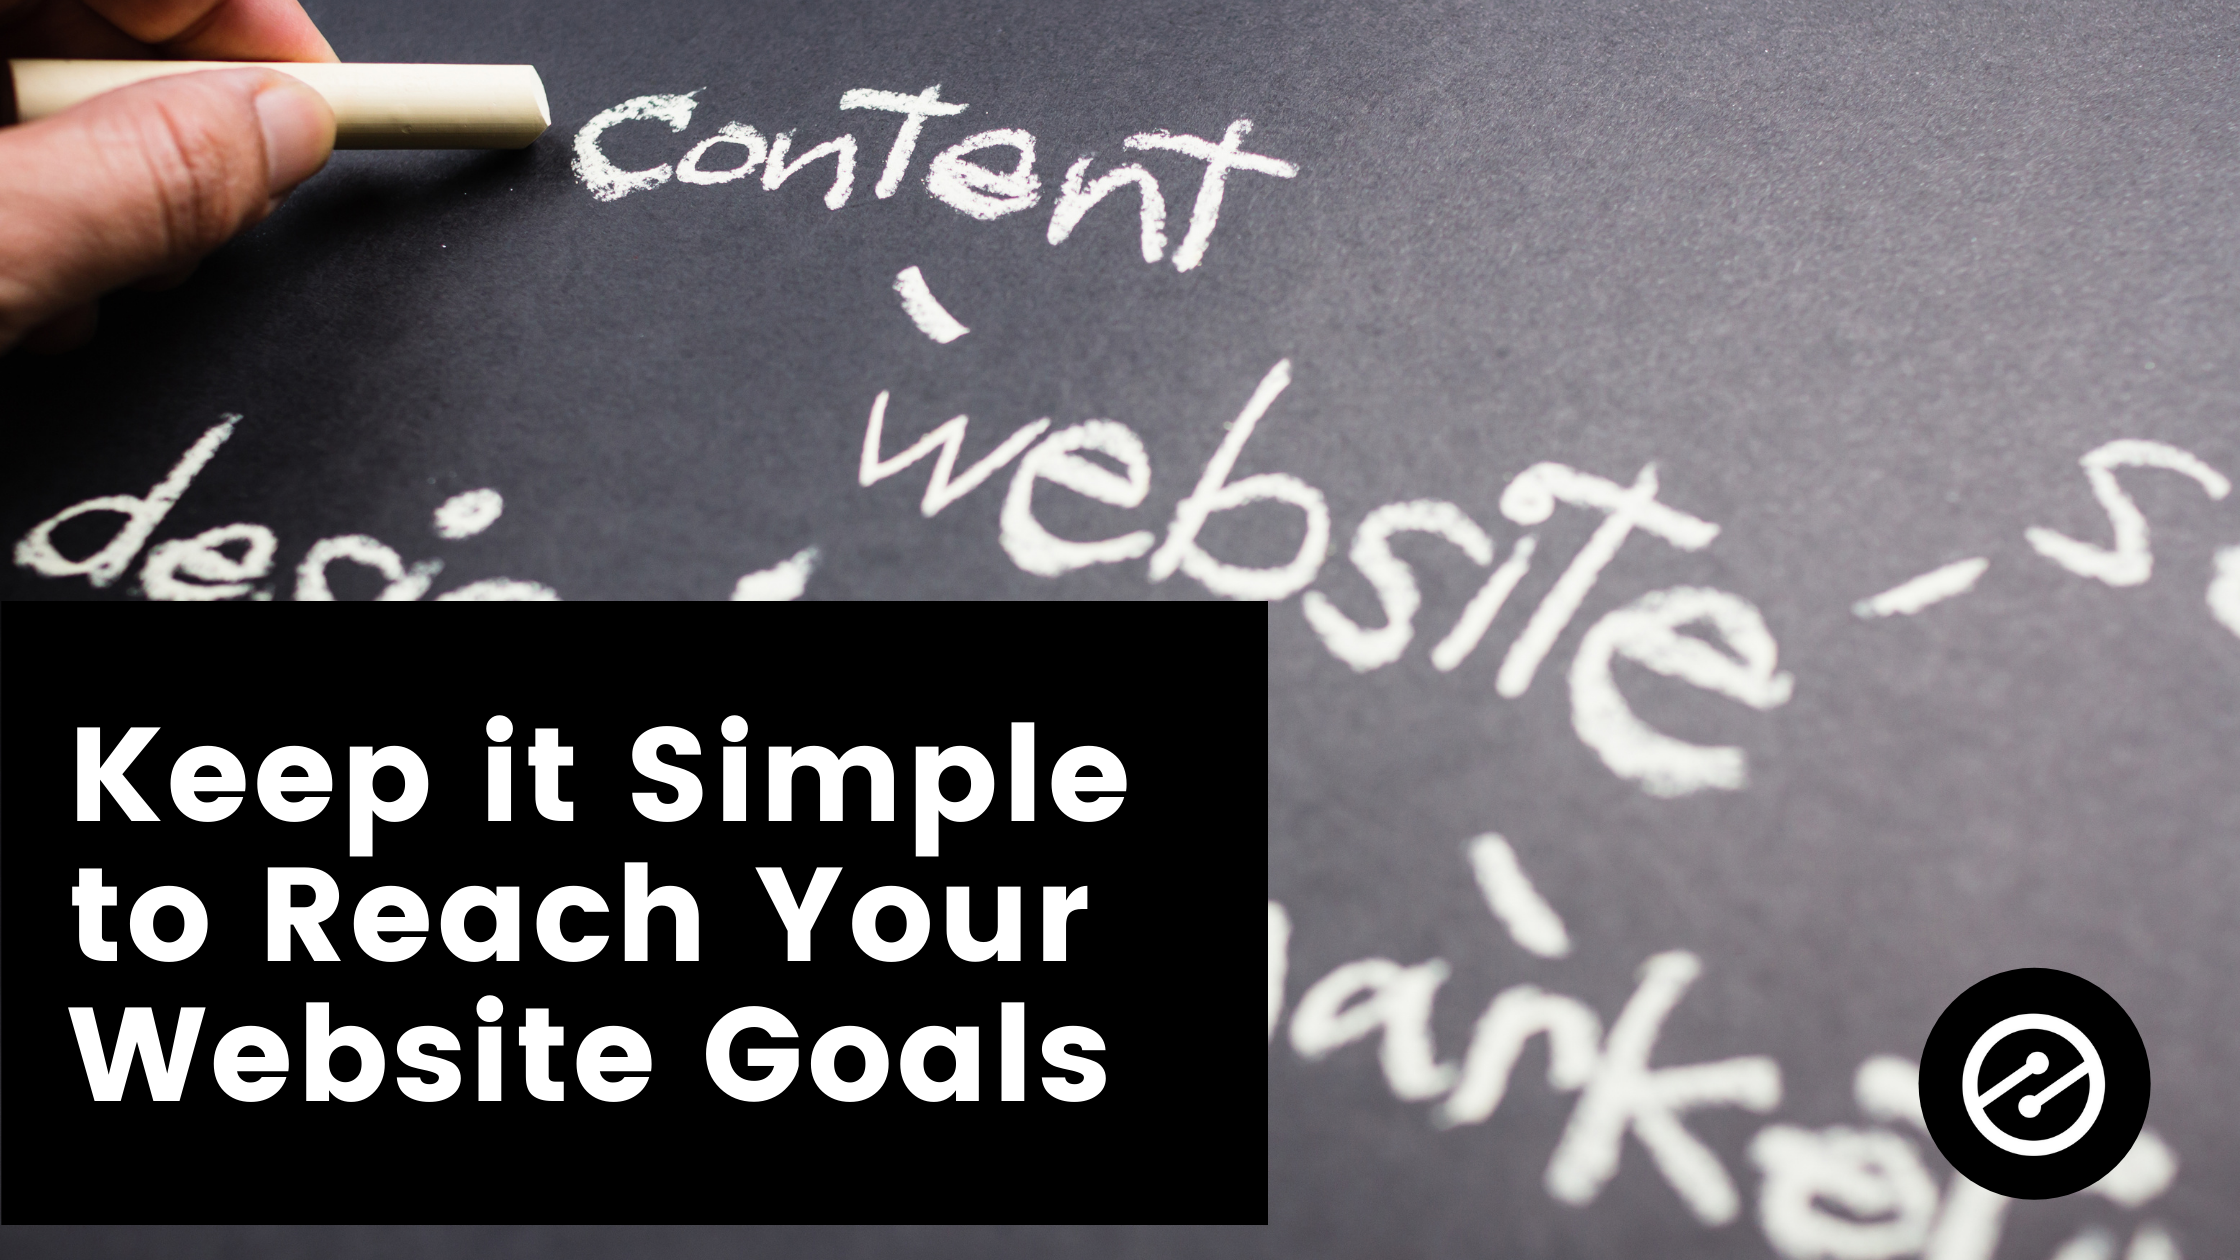 Why Keeping it ‘Simple’ is Key to Reach Your Website Goals